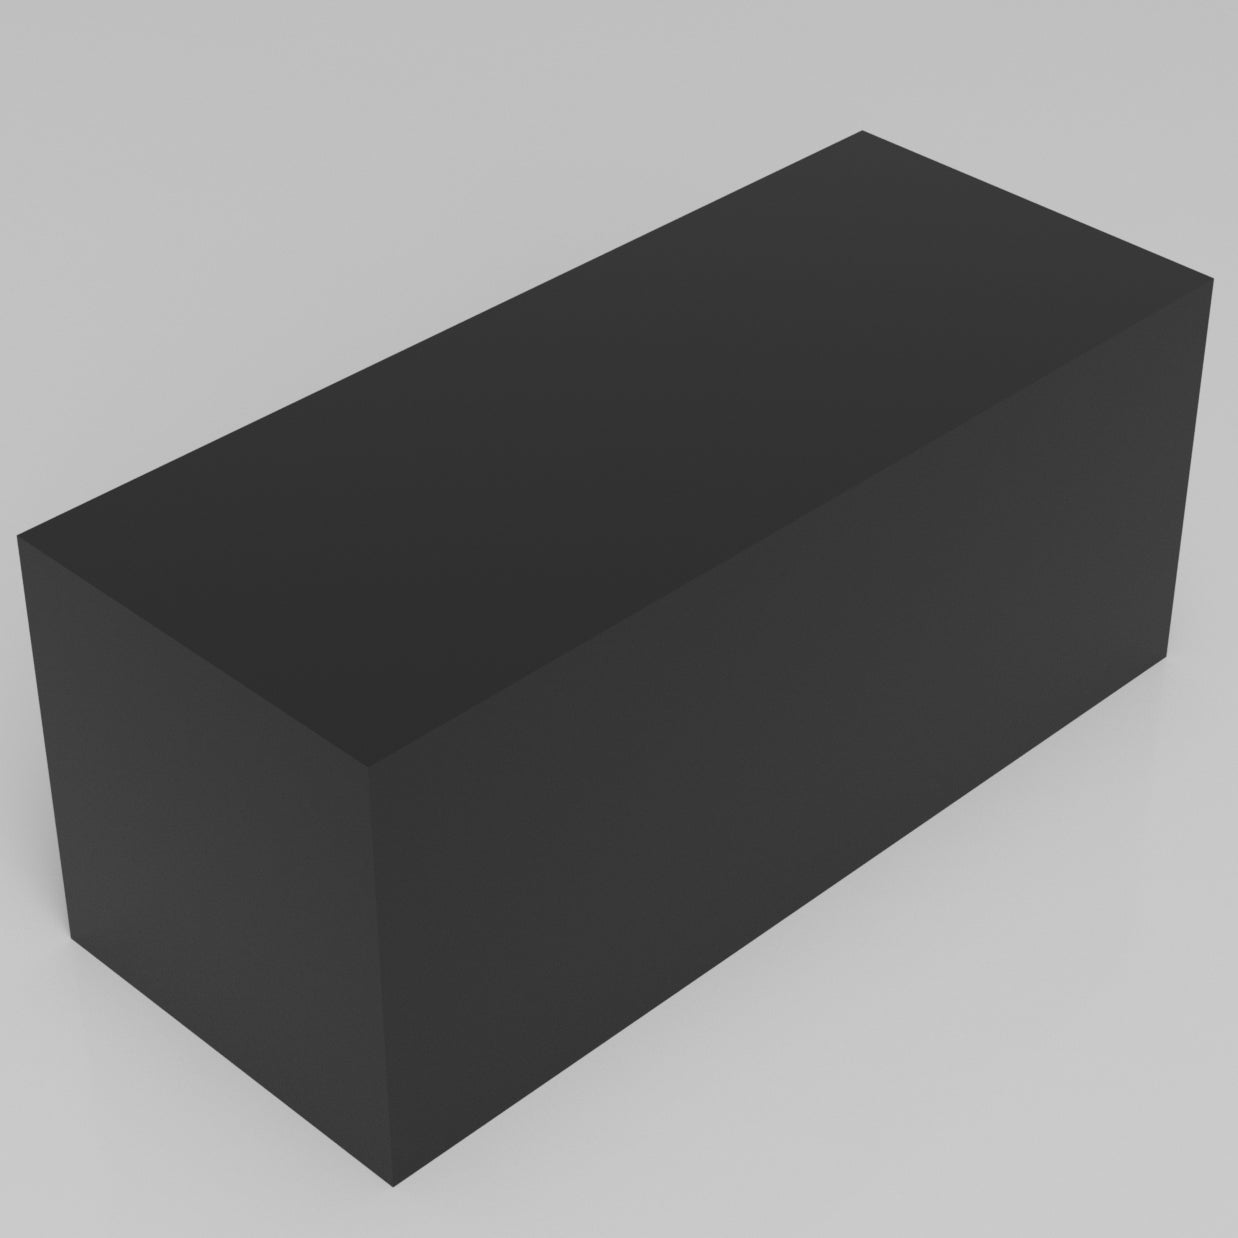 Machinable Wax Rectangular Block Front View 5 Inch by 5 Inch by 12 Inch